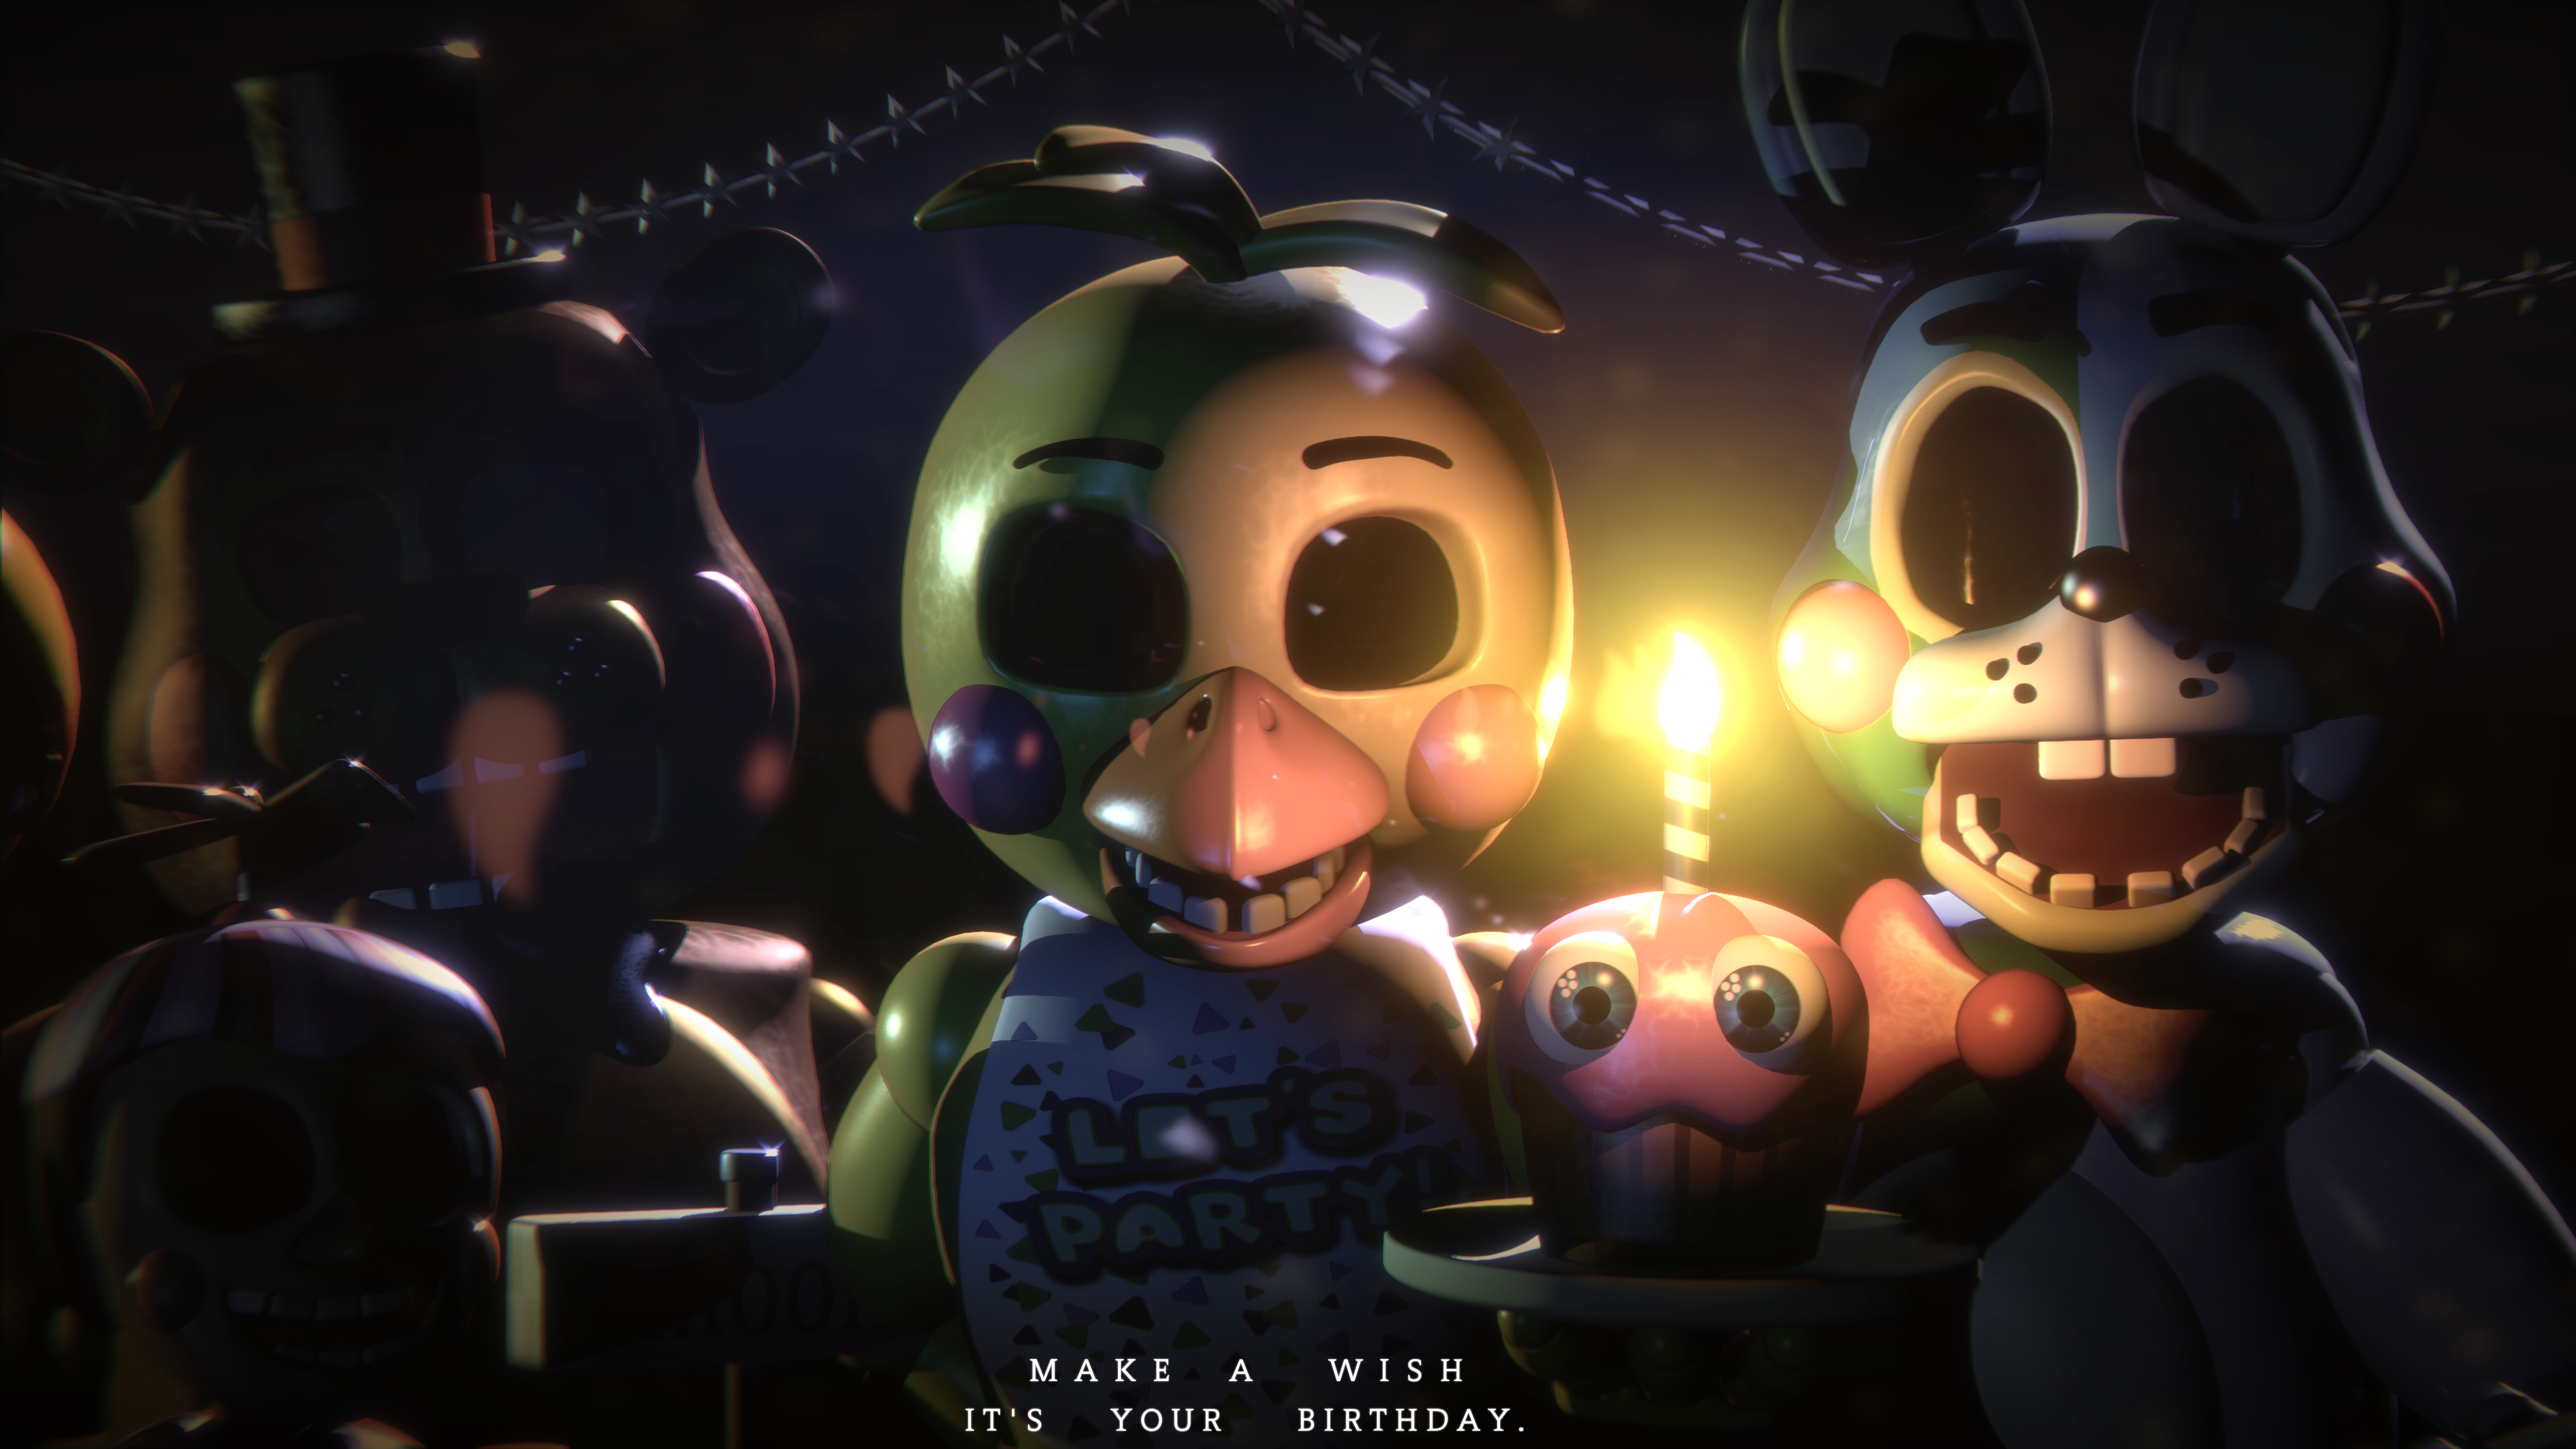 Download Dark Withered Chica FNAF Wallpaper